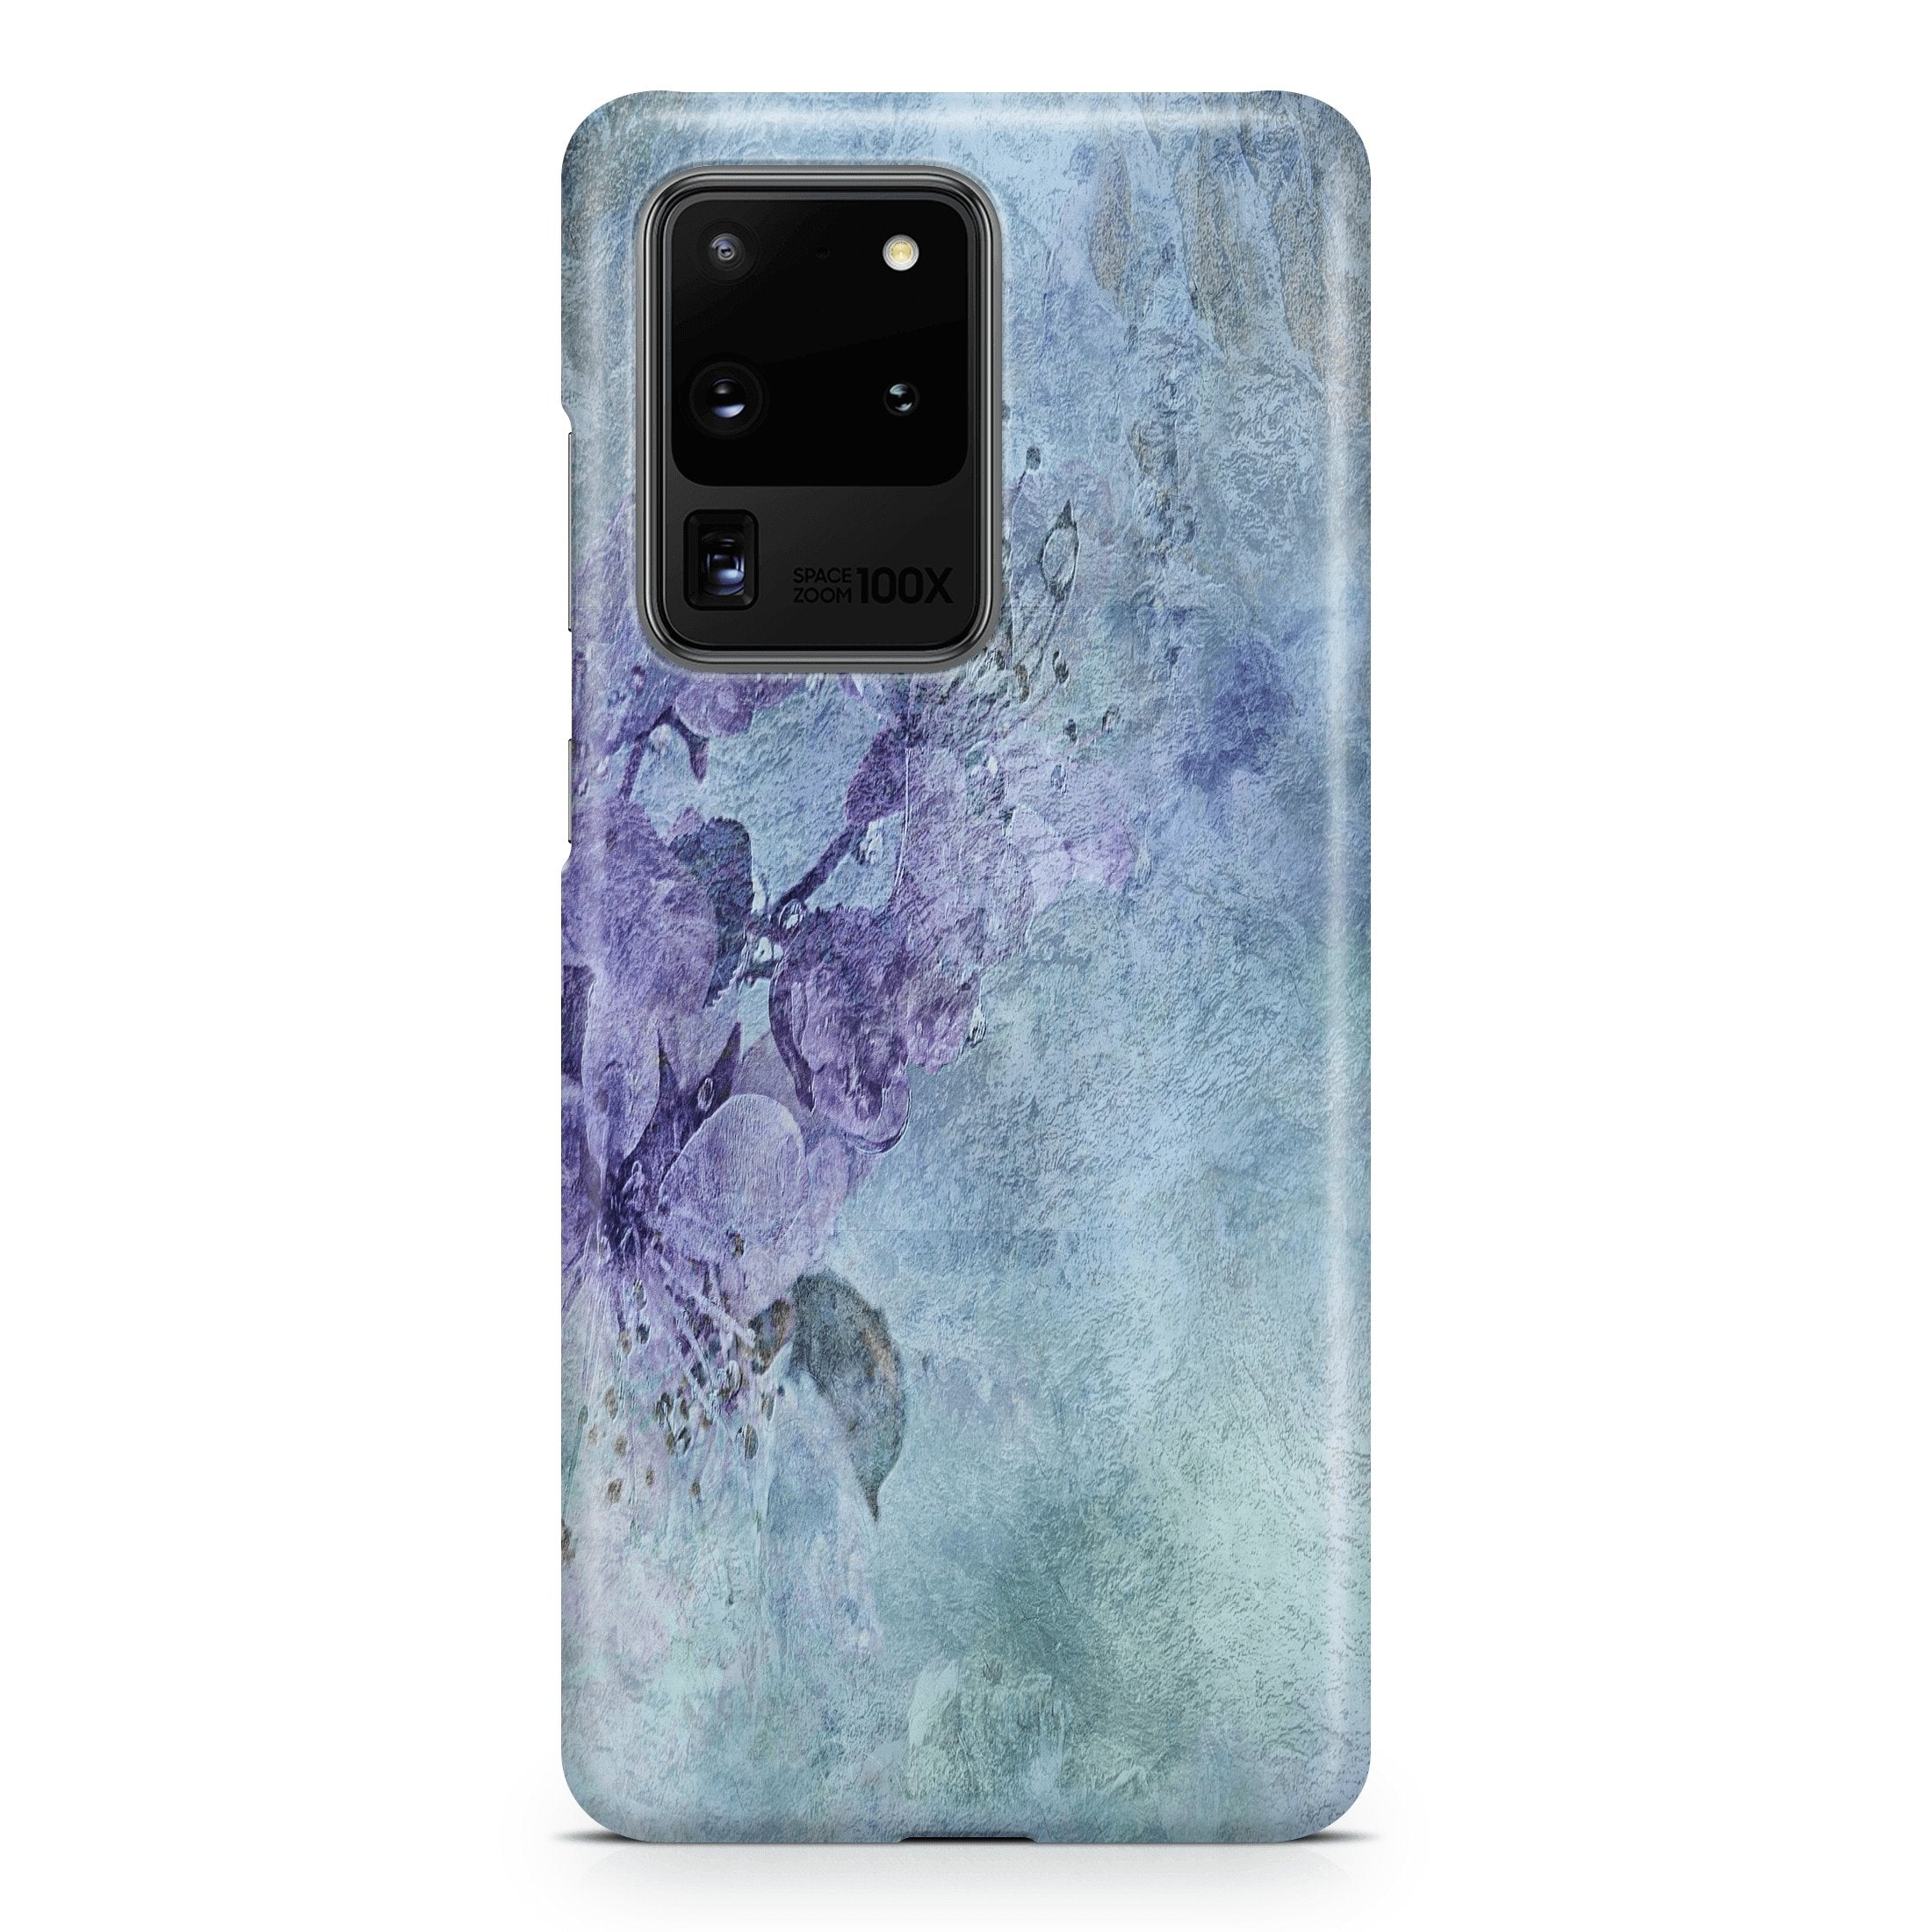 Spring Mist - Samsung phone case designs by CaseSwagger